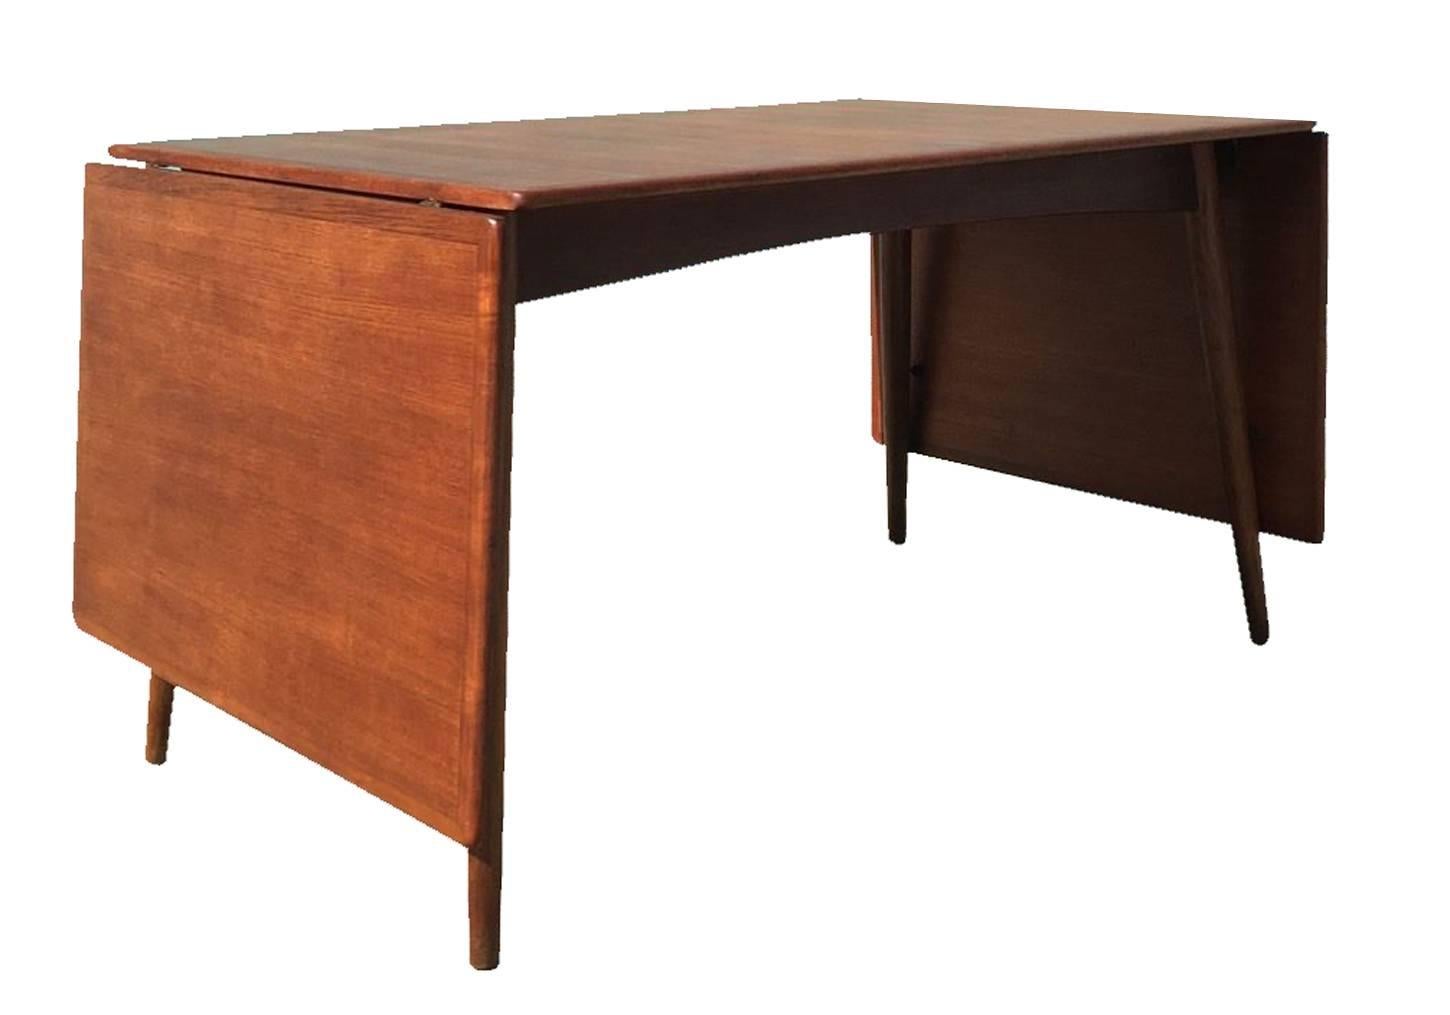 Danish modern teak dining table designed by Hans Wegner for Andreas Tuck in very good vintage condition, circa 1960. Drop leaves can be easily removed or raised to enlarge size. Oak wood splayed legs and accents with teak wood top.